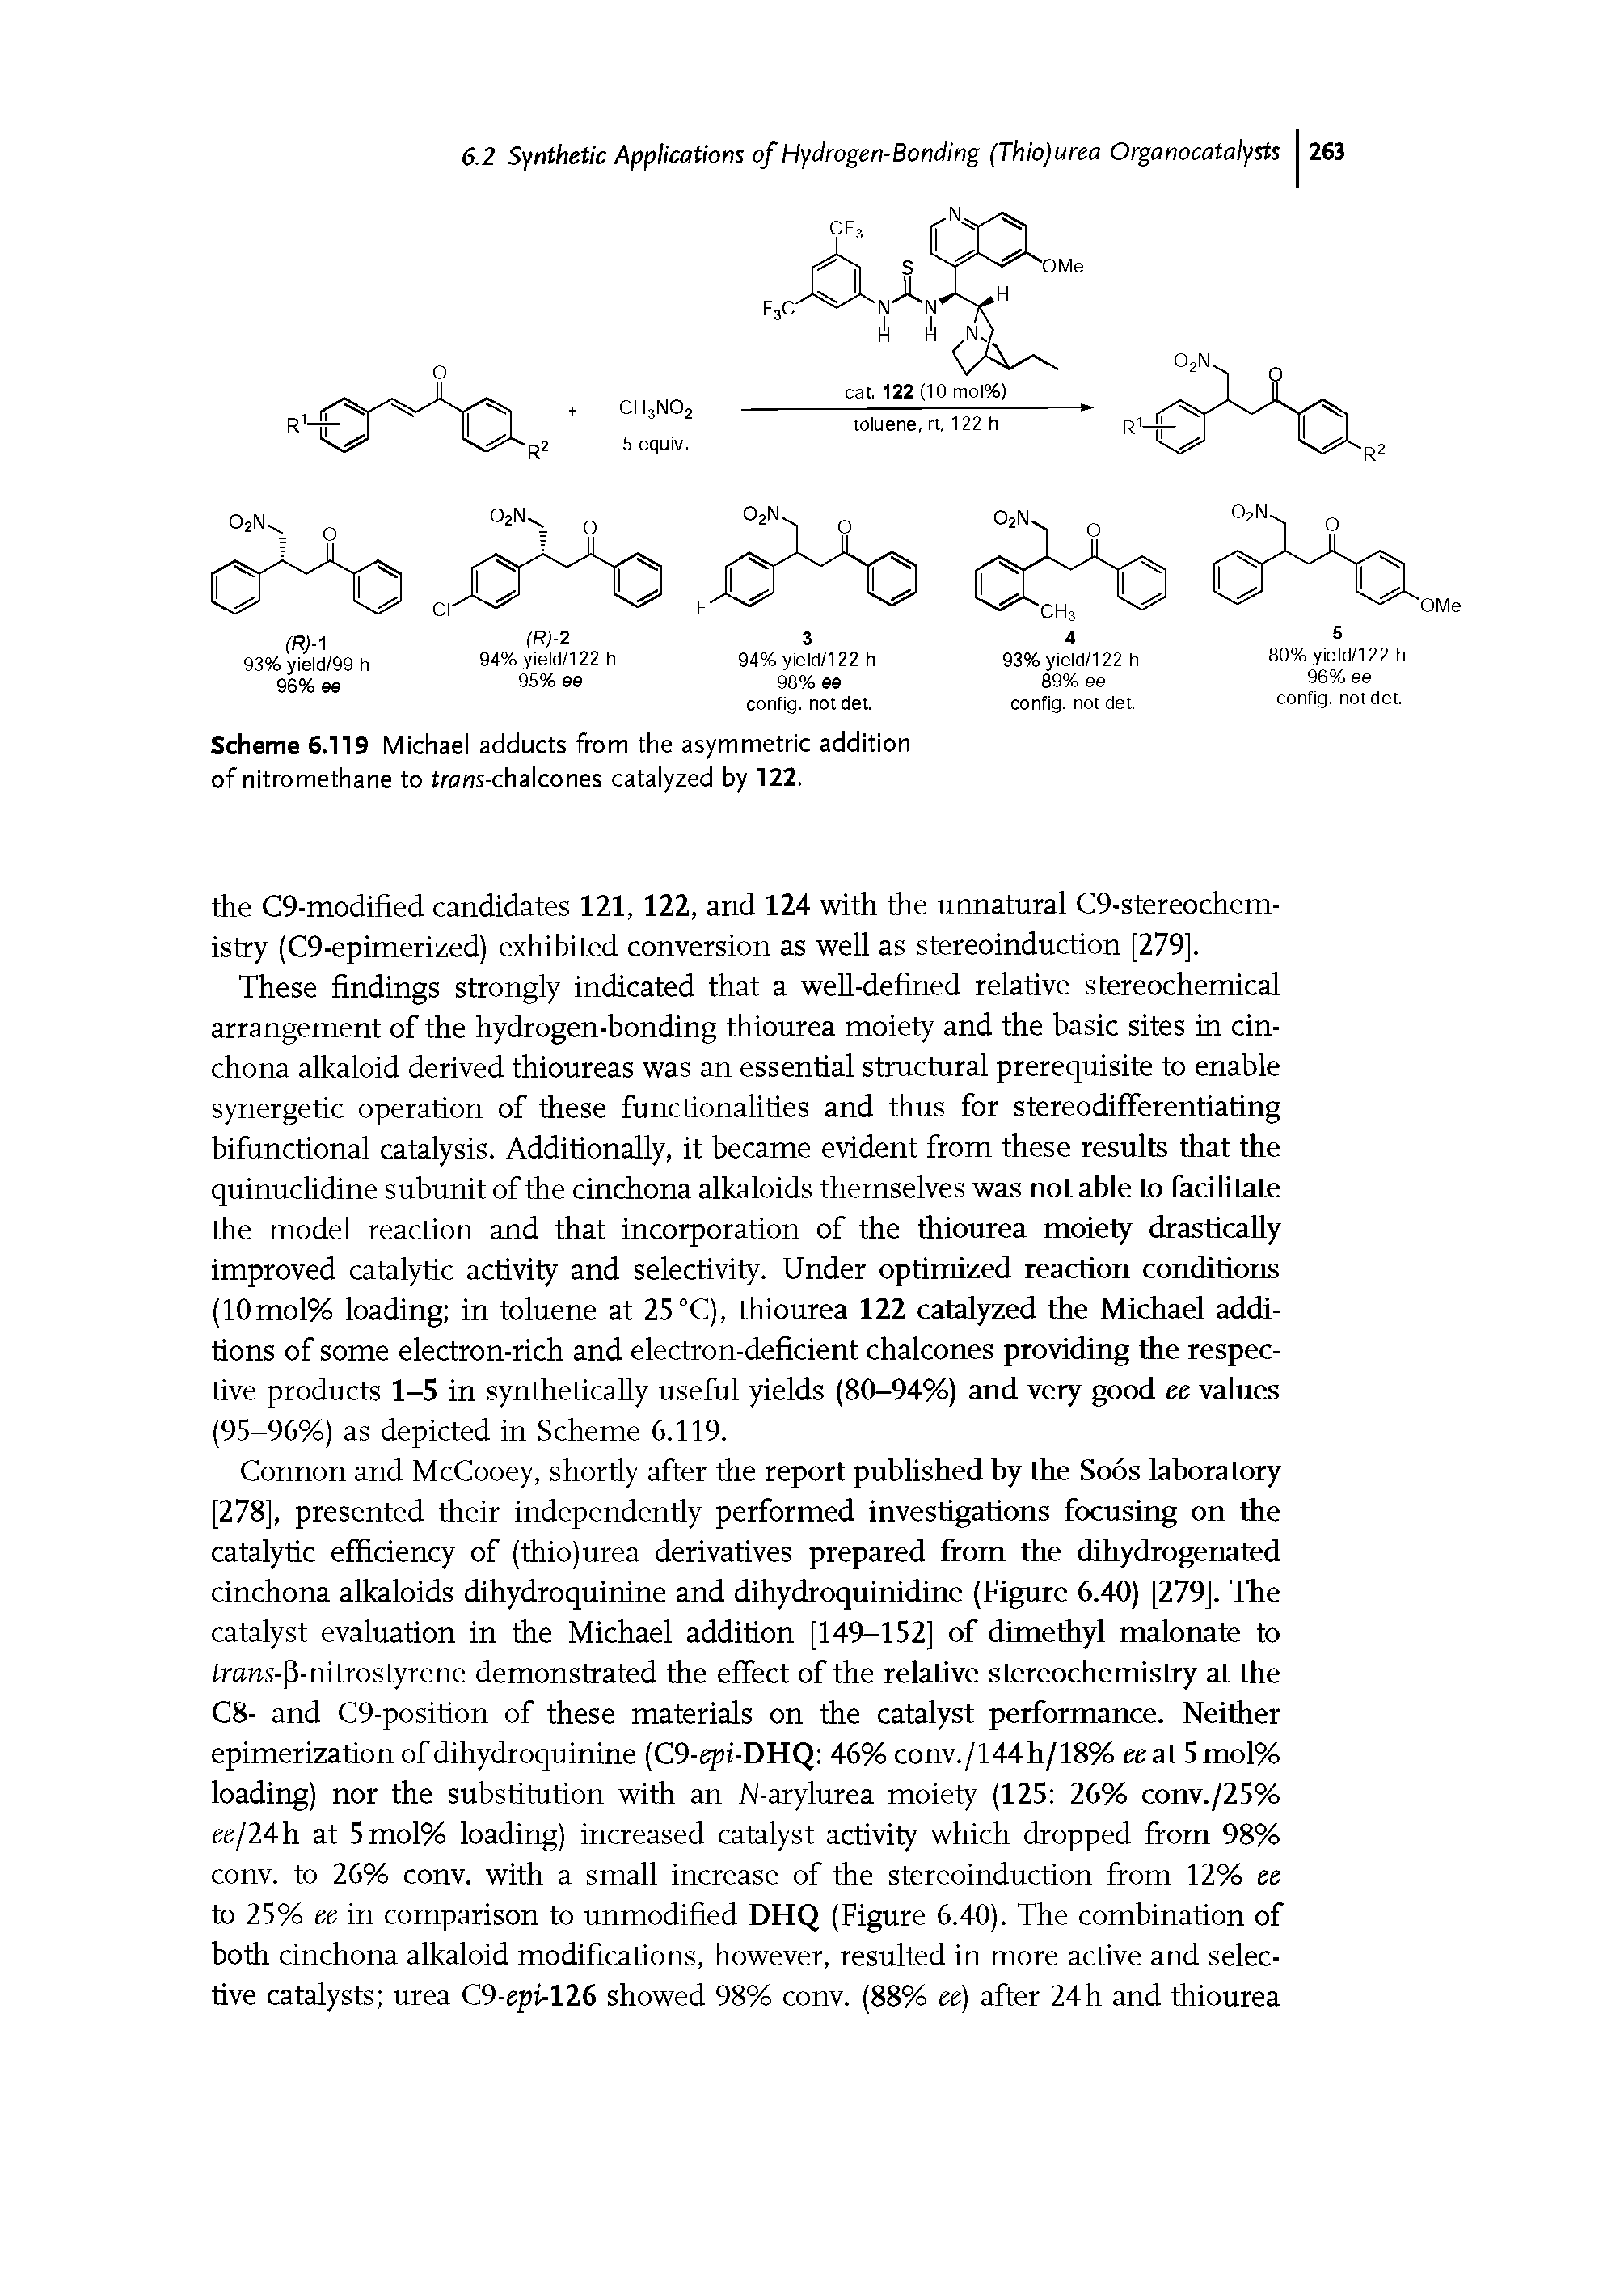 Scheme 6.119 Michael adducts from the asymmetric addition of nitromethane to trans-chalcones catalyzed by 122.